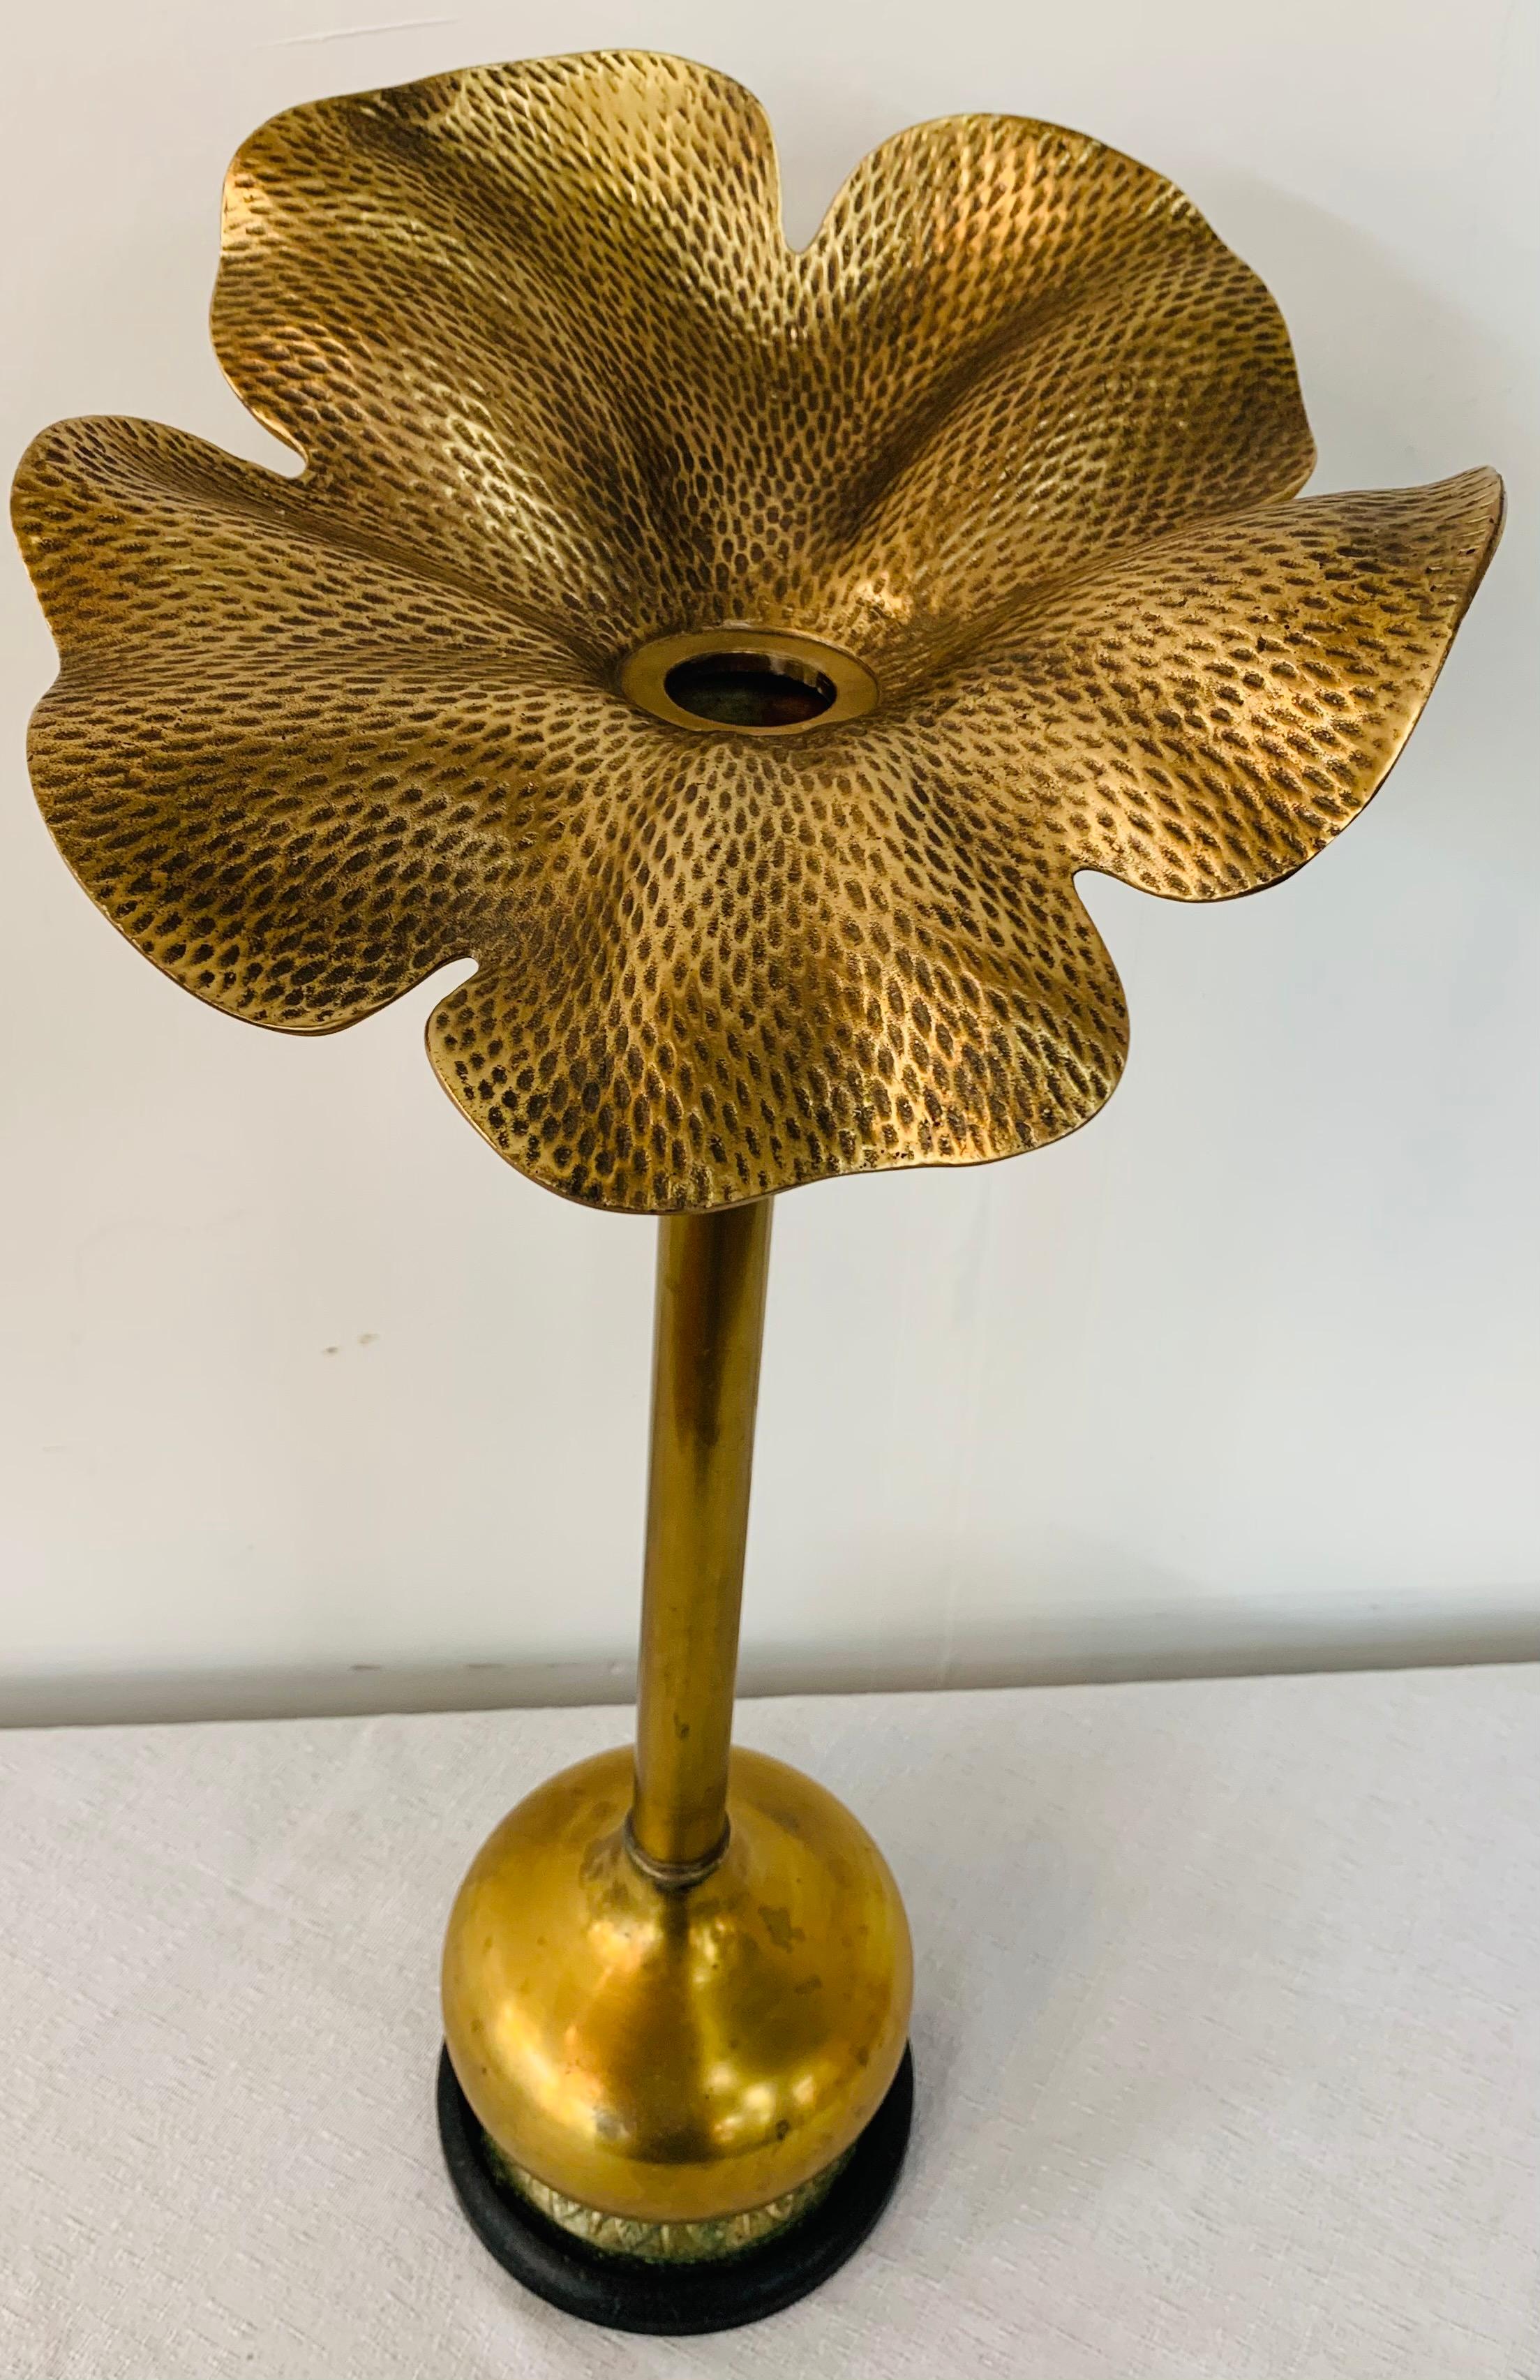 A decorative and stylish antique brass flower candleholder on a black marble base. A beautiful addition to decorate and add charm to your living space.

Dimensions: 19